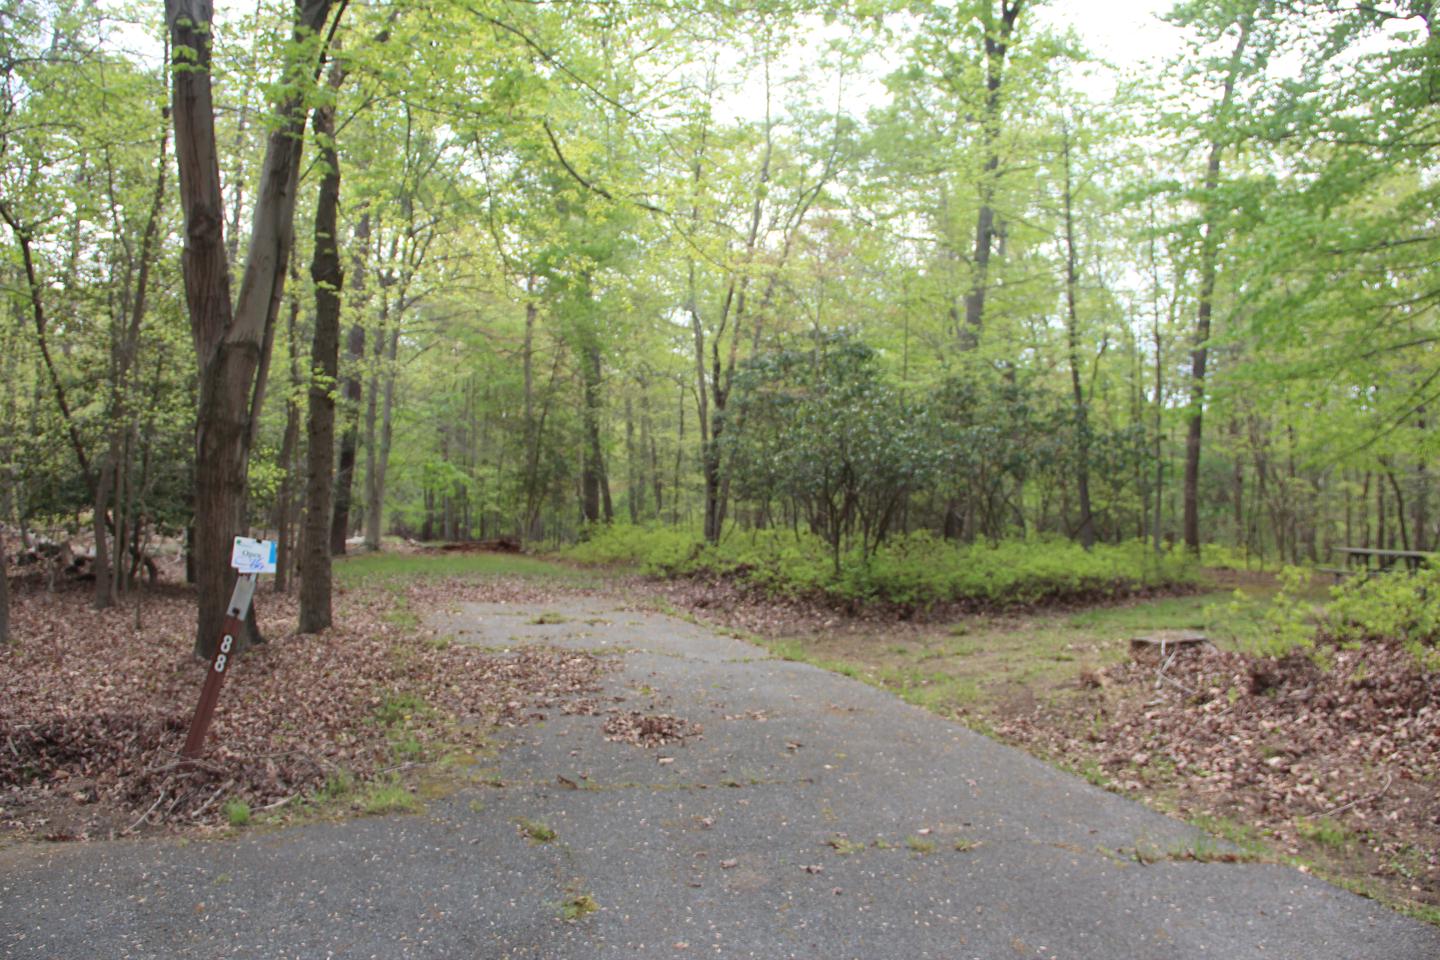 Asphalt pad for vehicle on C86 C Loop of the Greenbelt Park Maryland campground